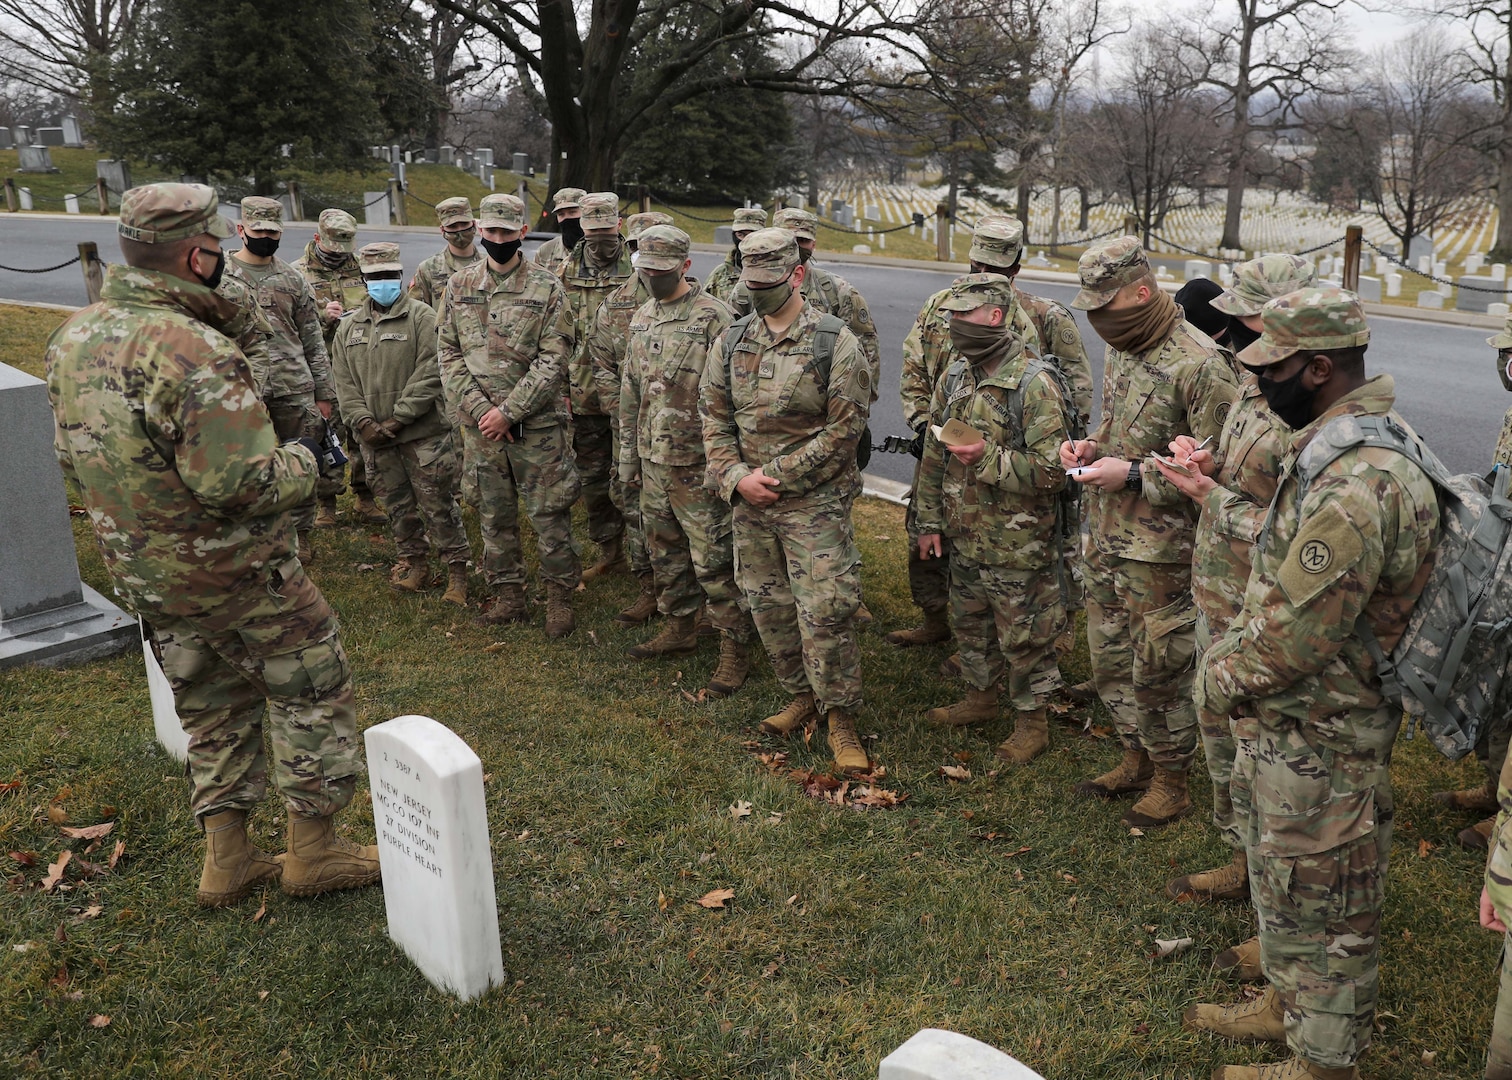 U.S. Soldiers with the 27th Infantry Brigade Combat Team, 42nd Infantry Division, New York National Guard, learn about the history and heroic actions of Medal of Honor recipient Sgt. Alan L. Eggers during a visit to Arlington National Cemetery in Arlington, Va., Feb. 14, 2021. Eggers, a World War I veteran of the New York National Guard’s 27th Infantry Division, received the Medal of Honor with two other Soldiers for their heroic actions in combat near Le Catelet, France, Sept. 29, 2018.